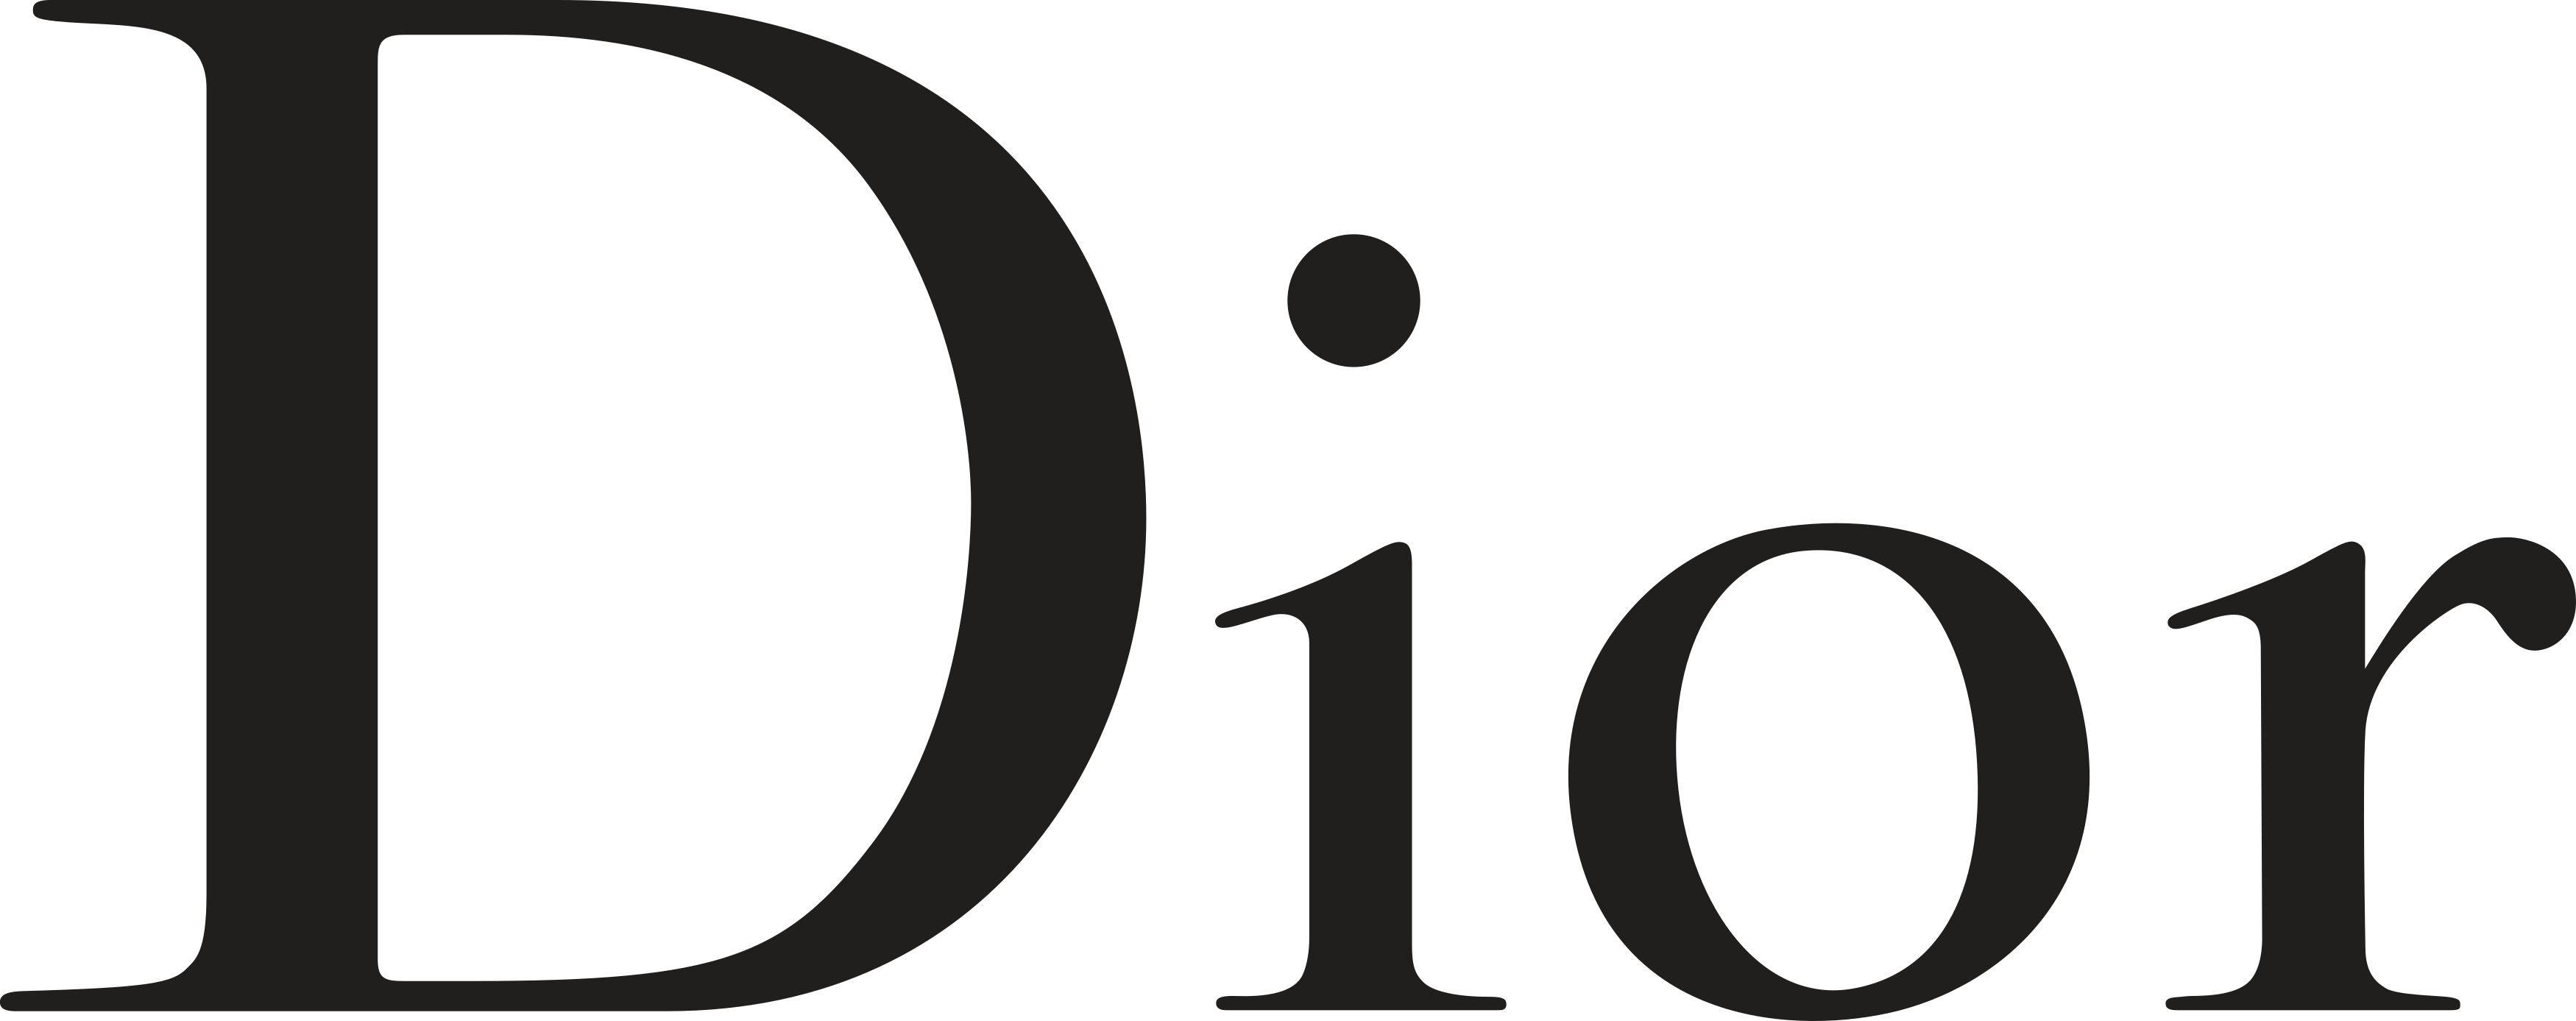 Christian Haute Couture Dior Logo Chanel Se PNG Image